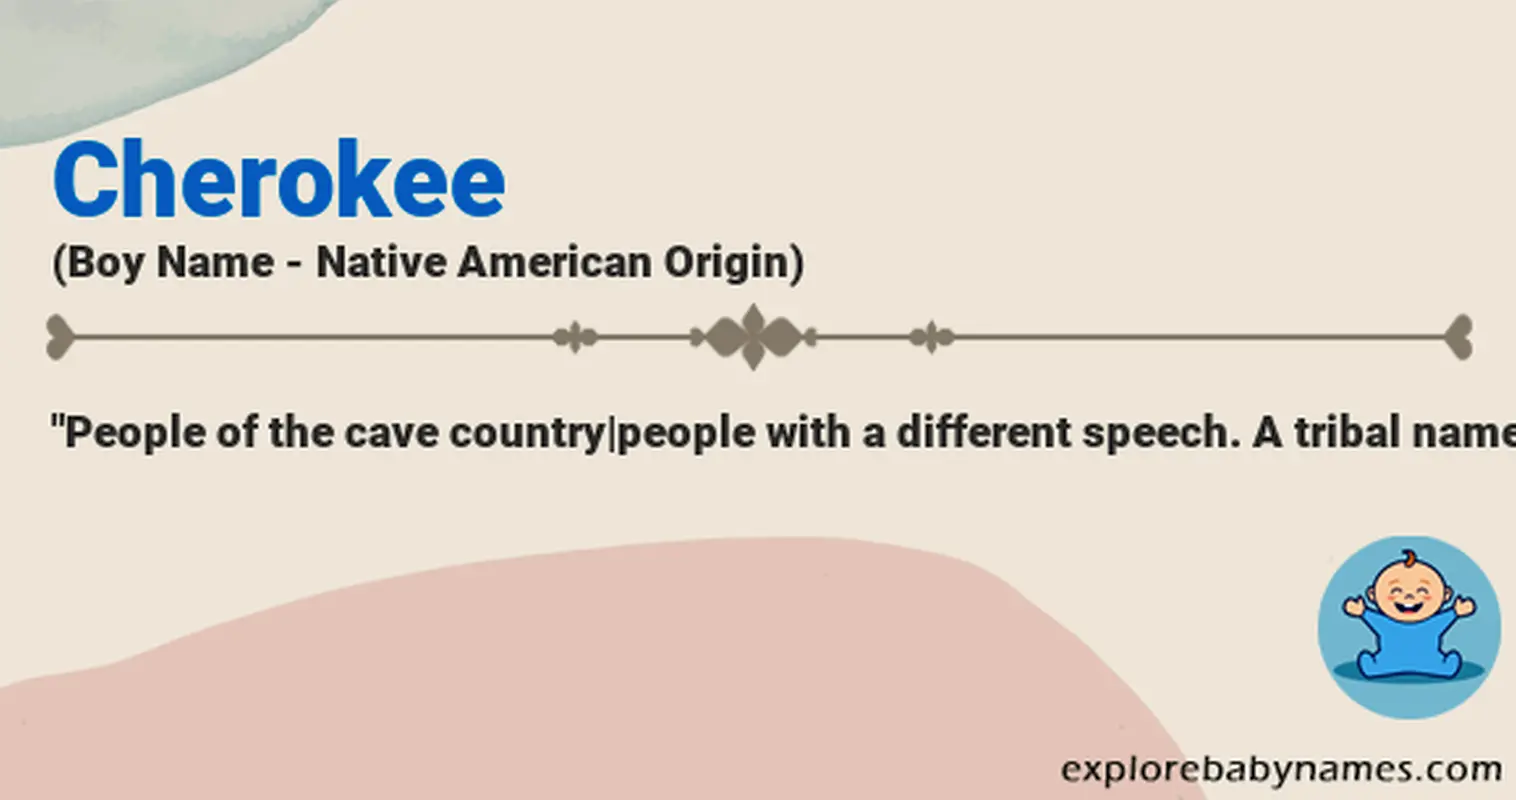 Meaning of Cherokee